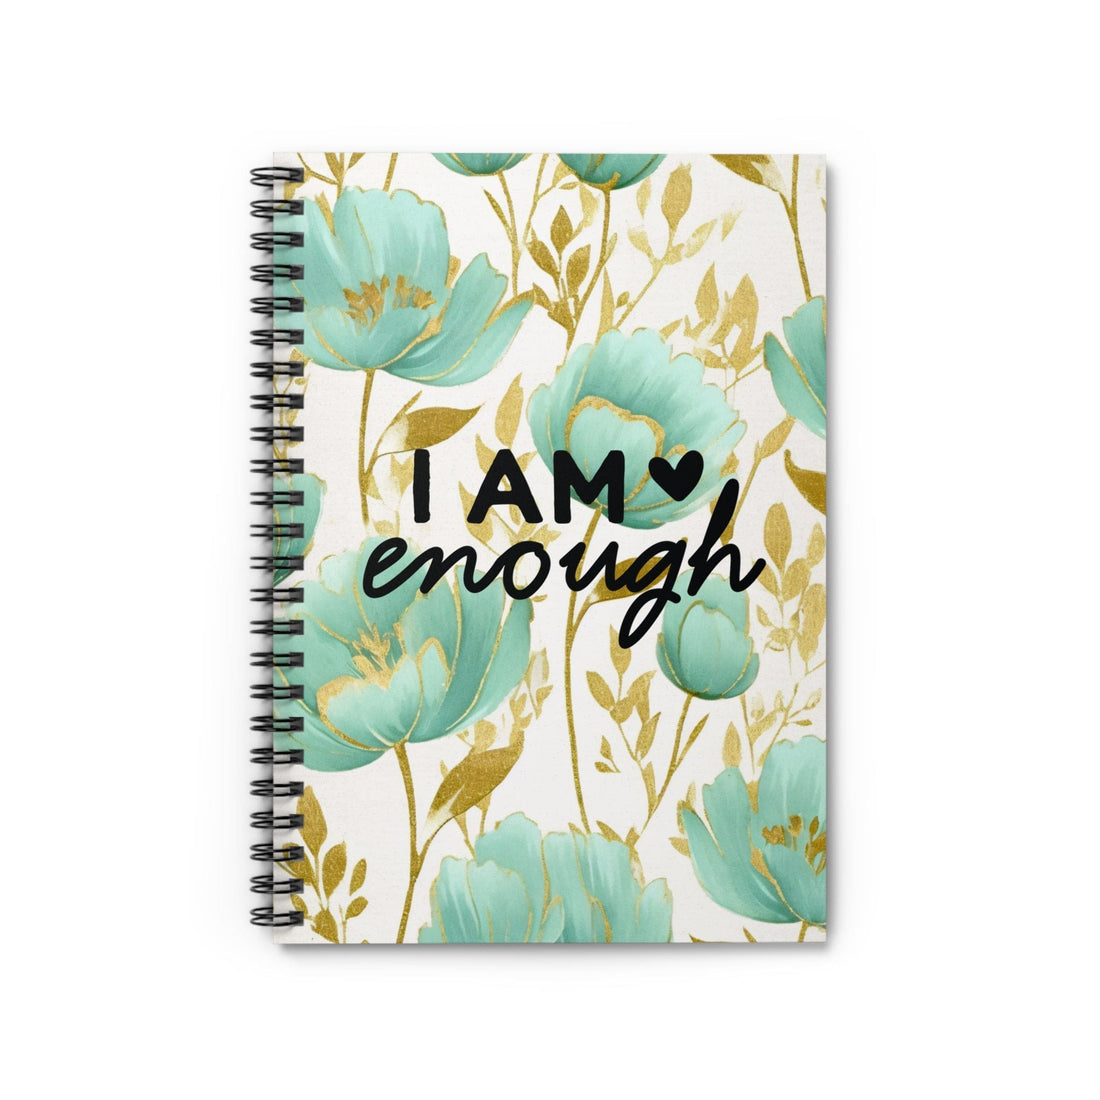 Beautiful Floral Spiral Notebook, Lined Journal, Metallic Watercolor, with Motivational Quote, I am enough